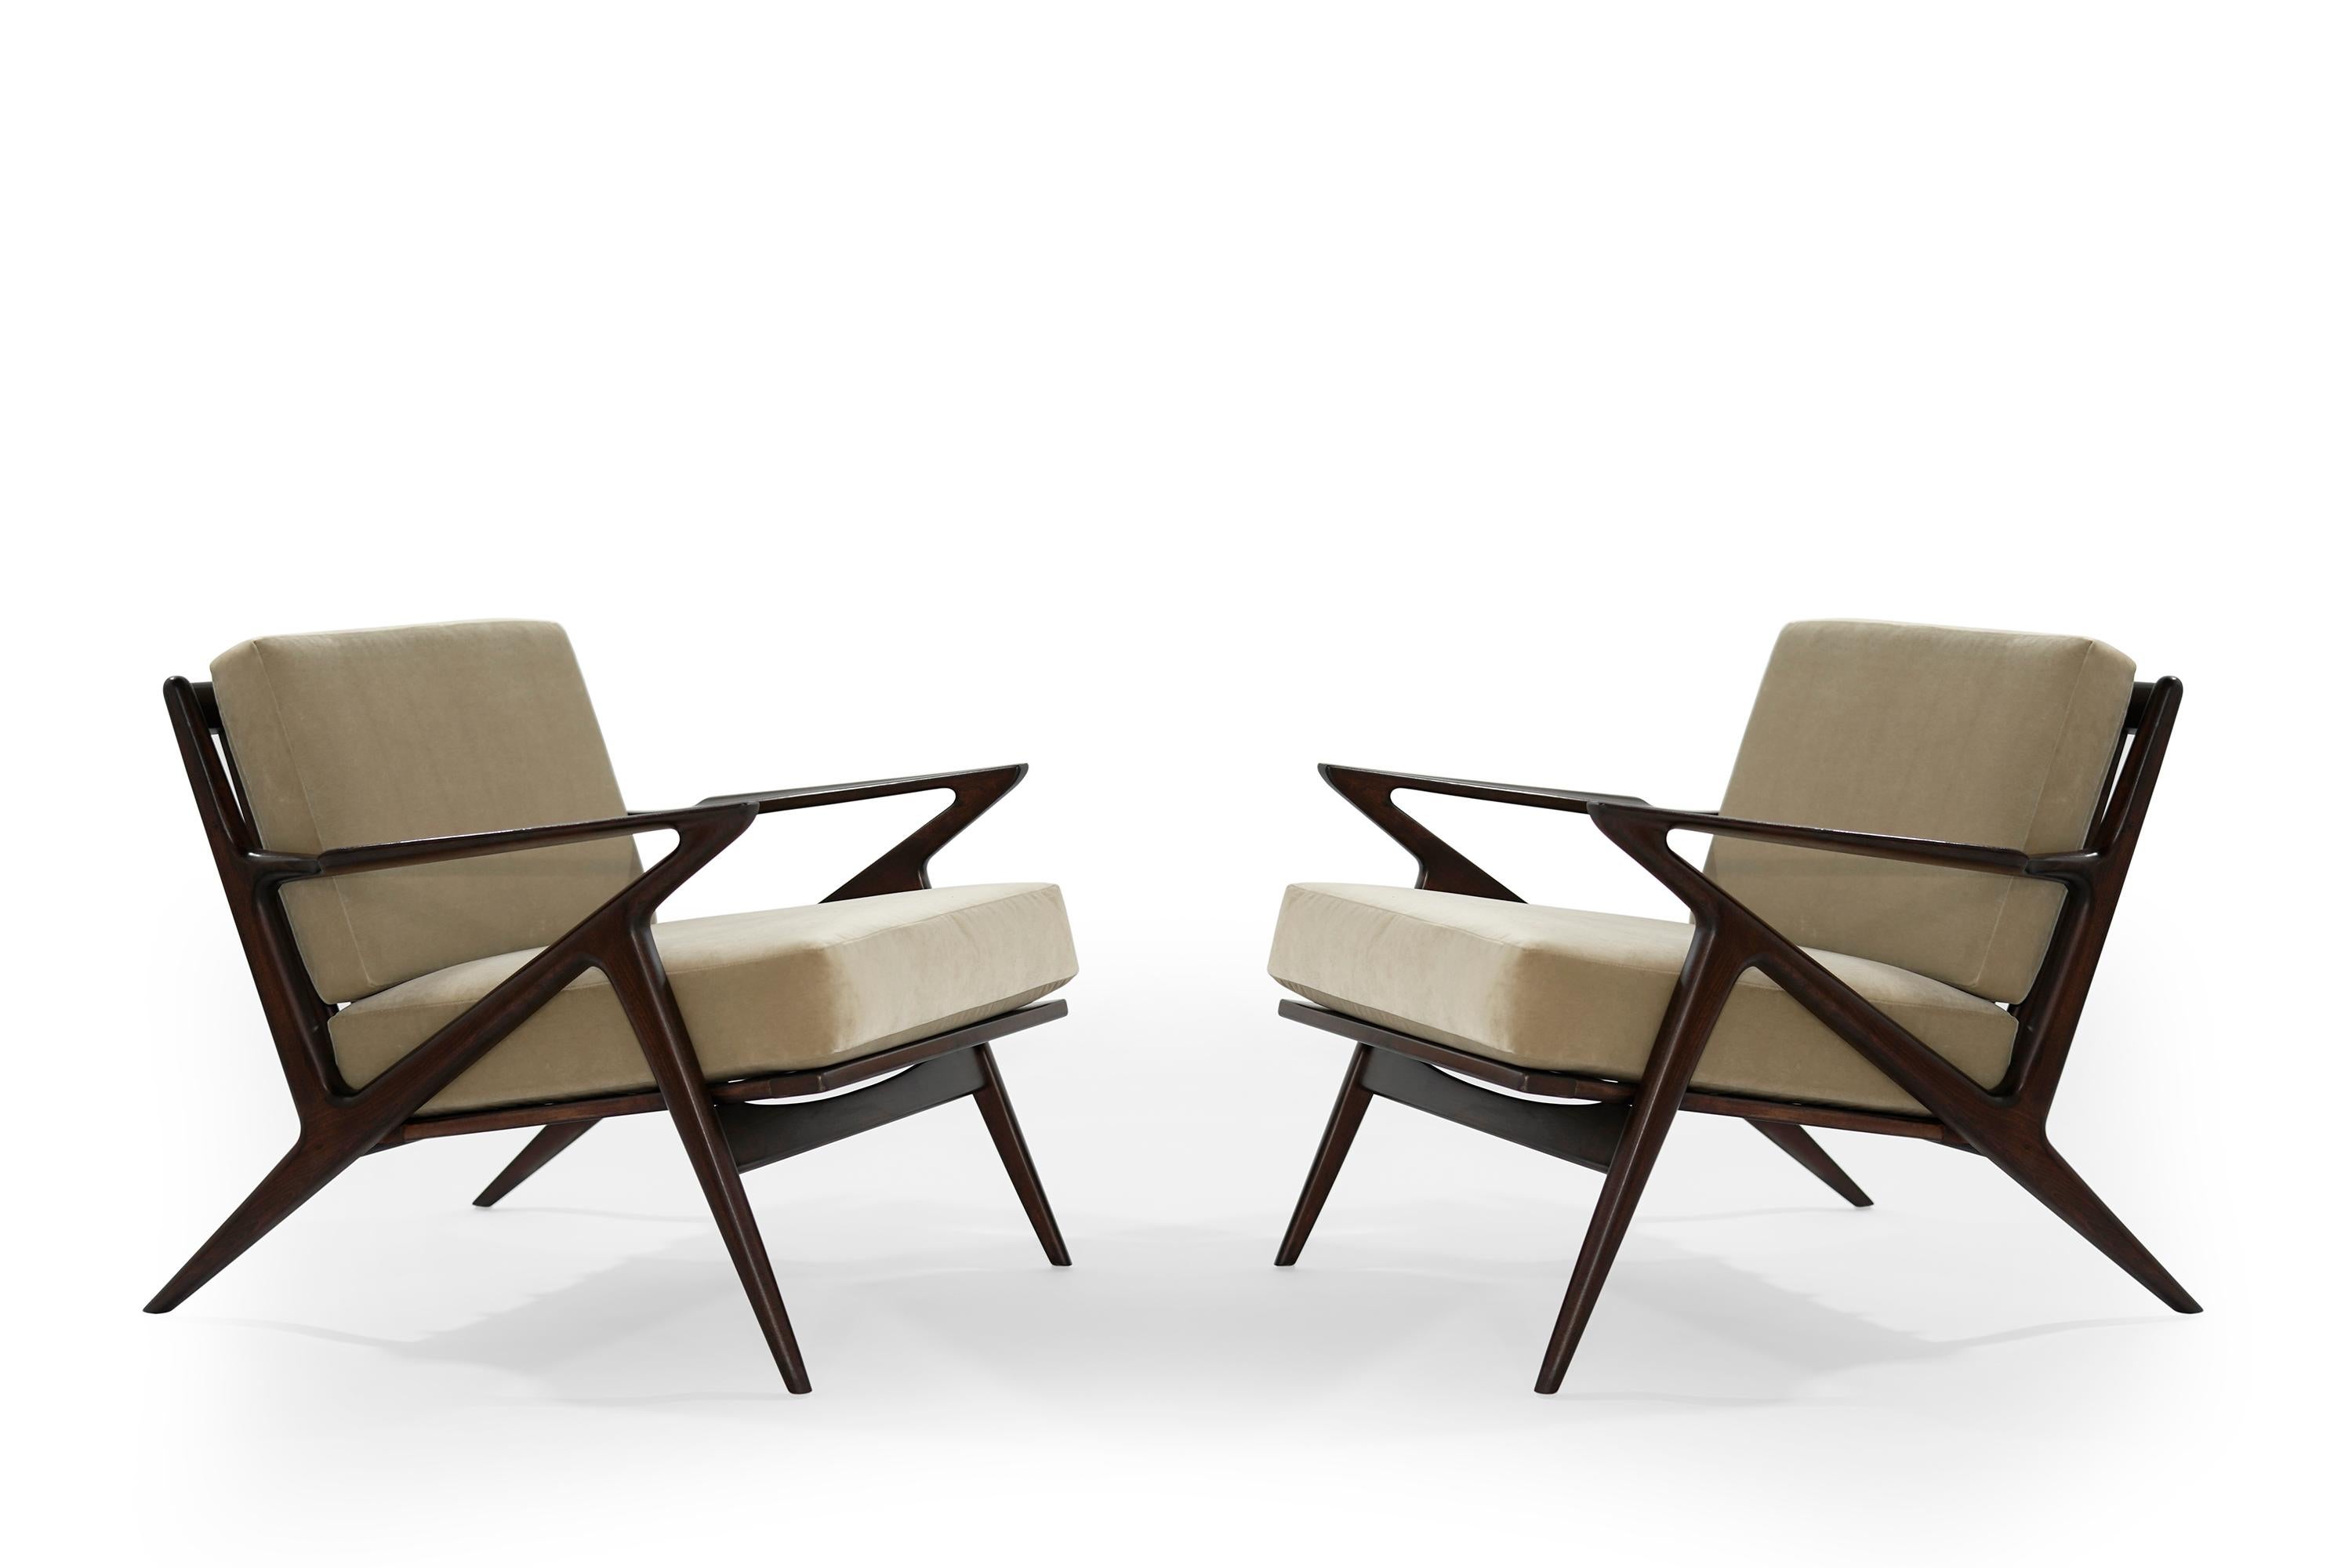 Iconic ‘Z’ lounge chairs designed by Poul Jensen for Selig, Denmark, circa 1950s.
Newly upholstered in natural velvet.